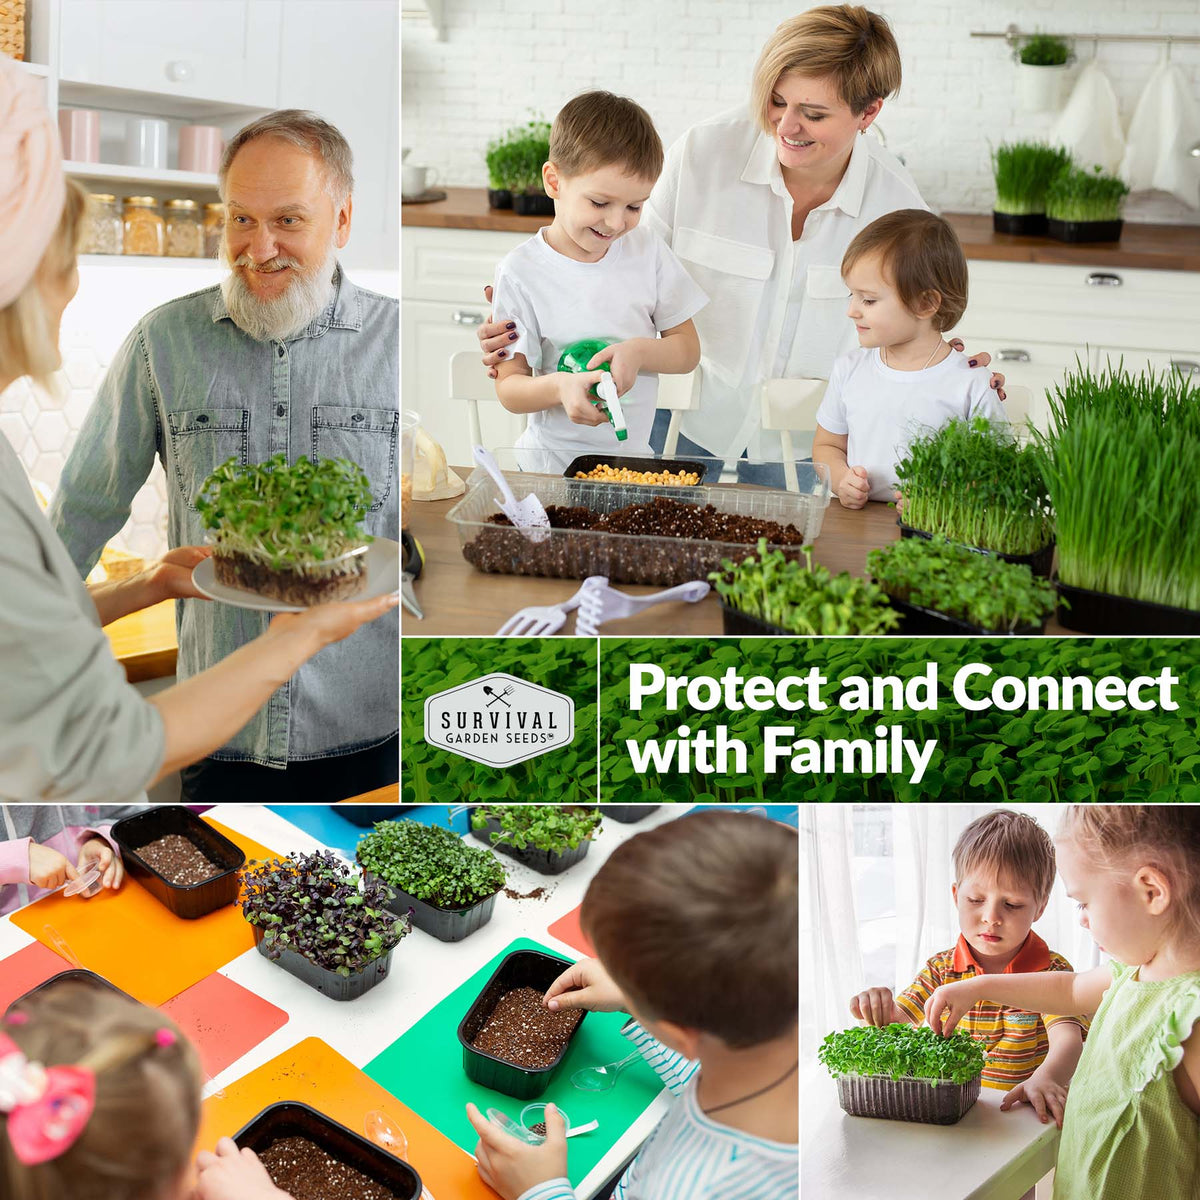 Protect and connect with family by sprouting seeds